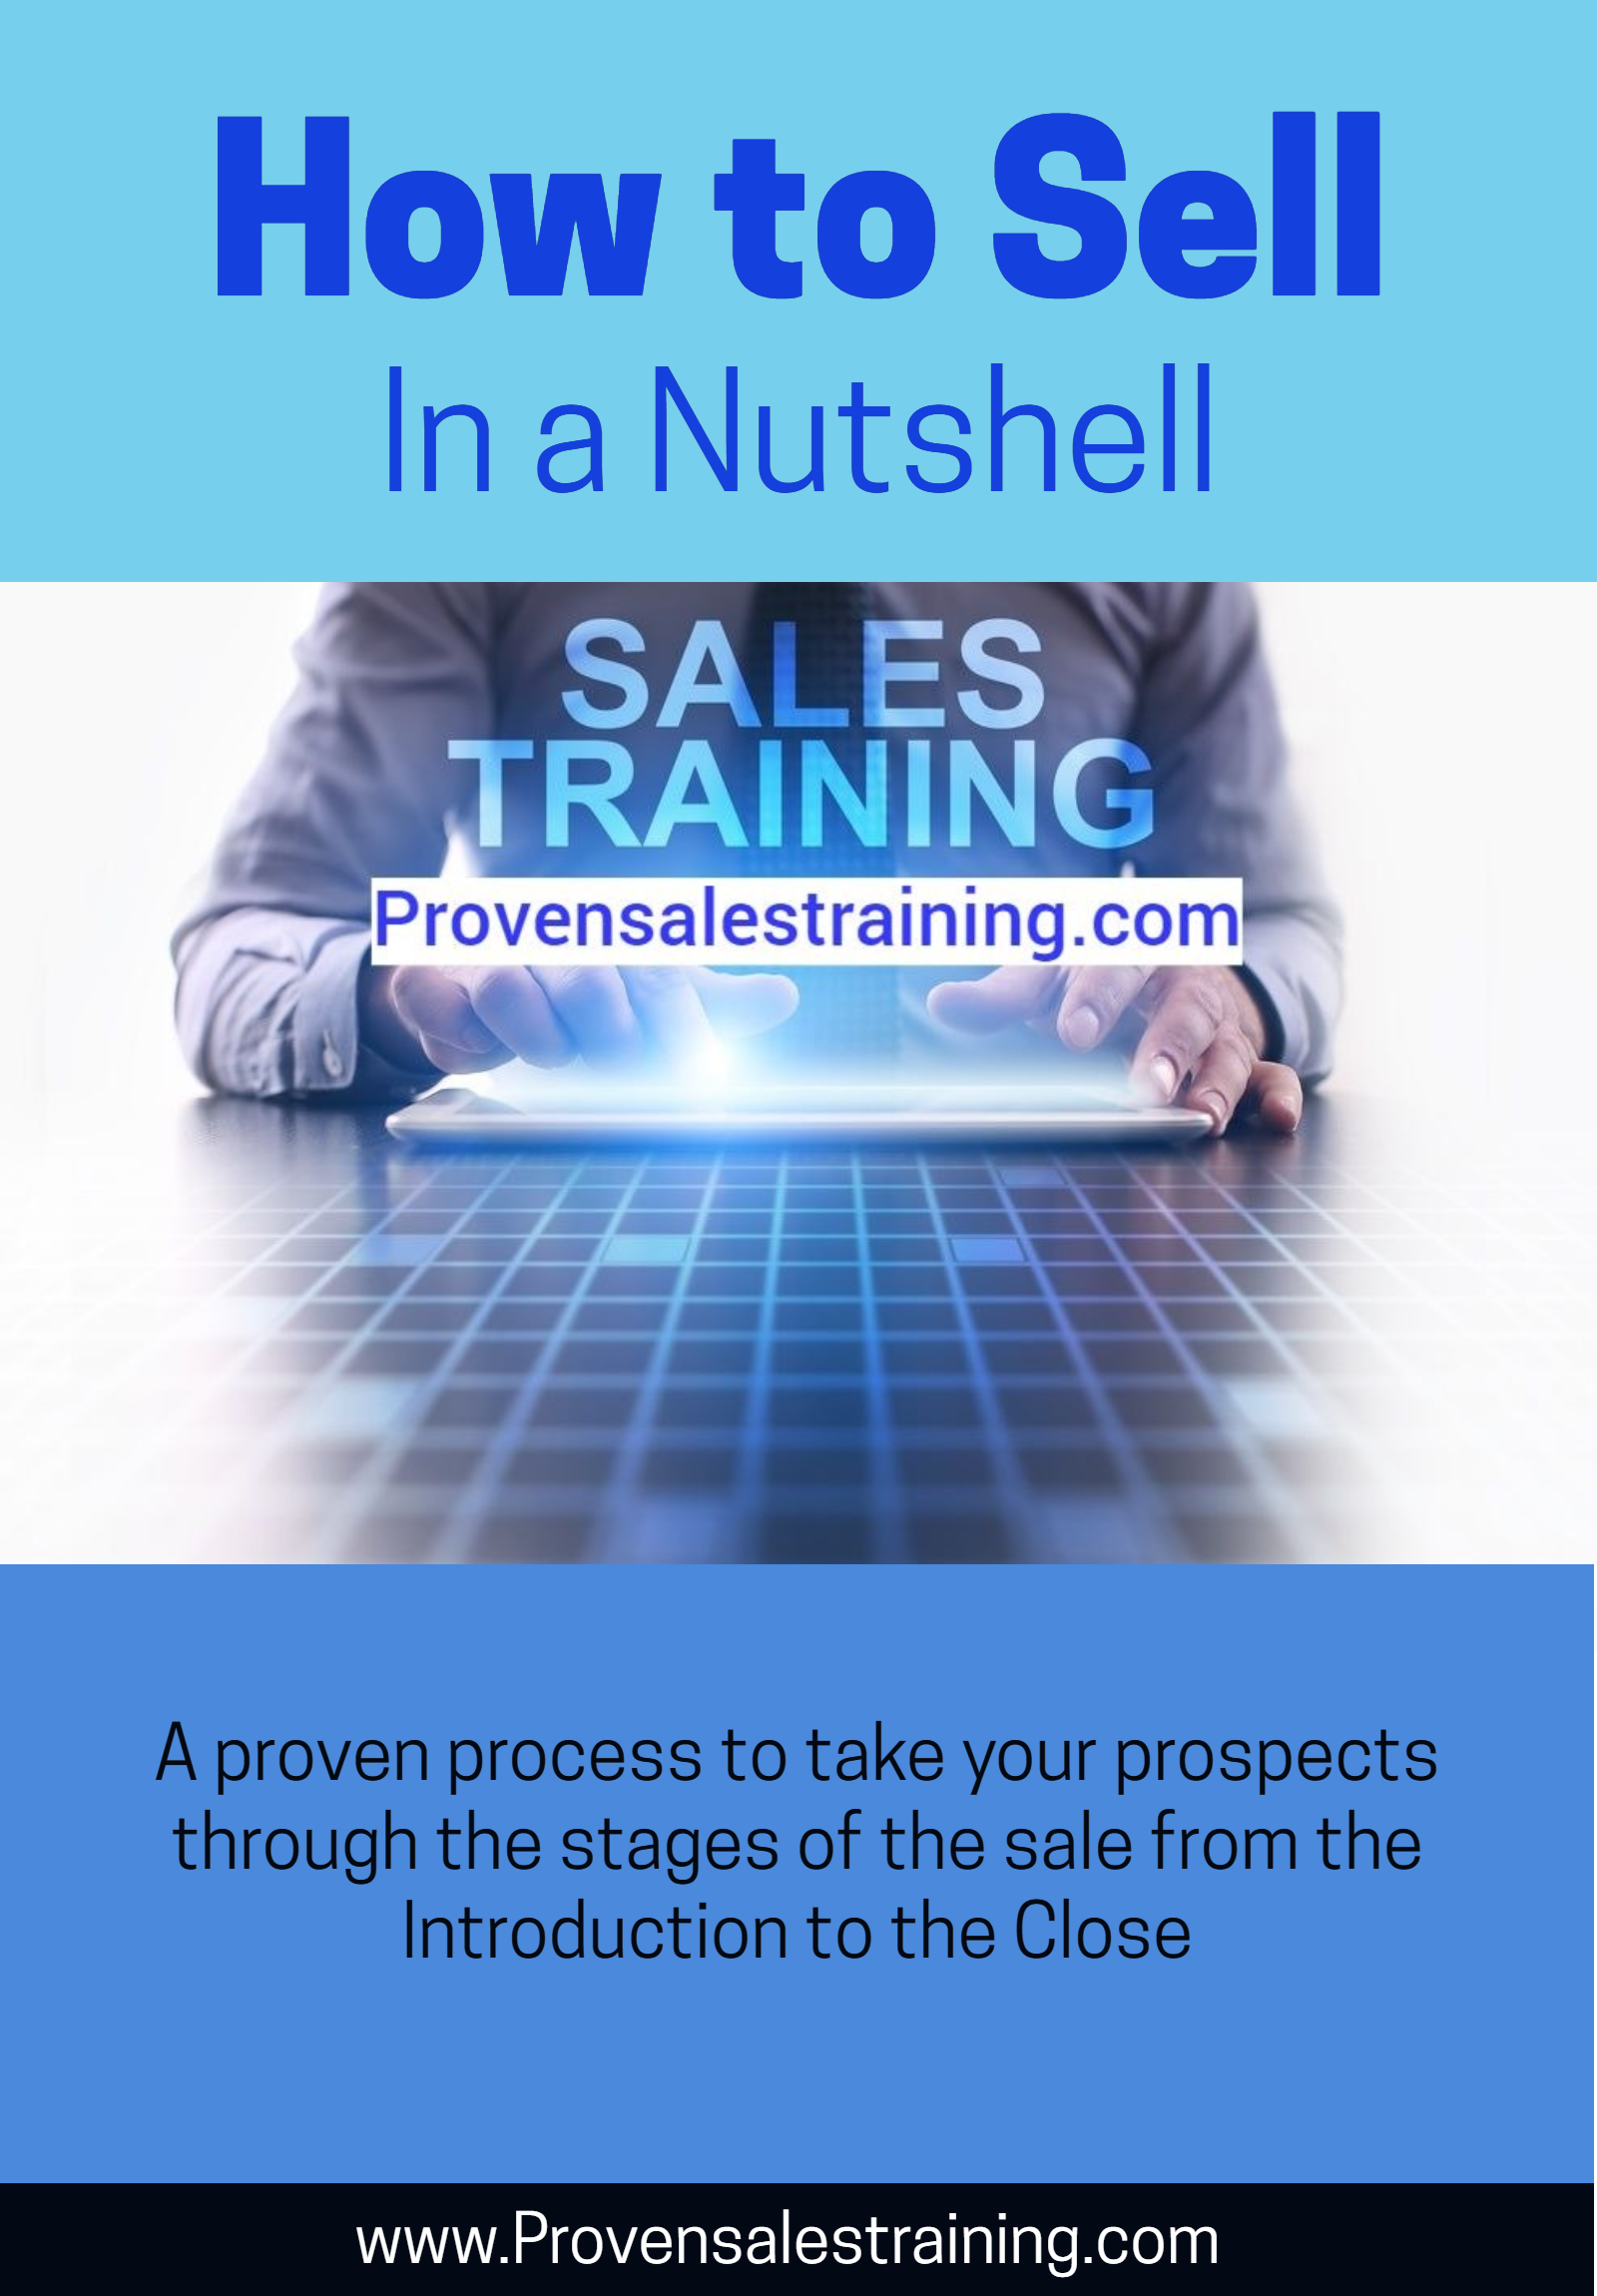 Learn how to sell anything with this mini sales training course: How to Sell in a Nutshell